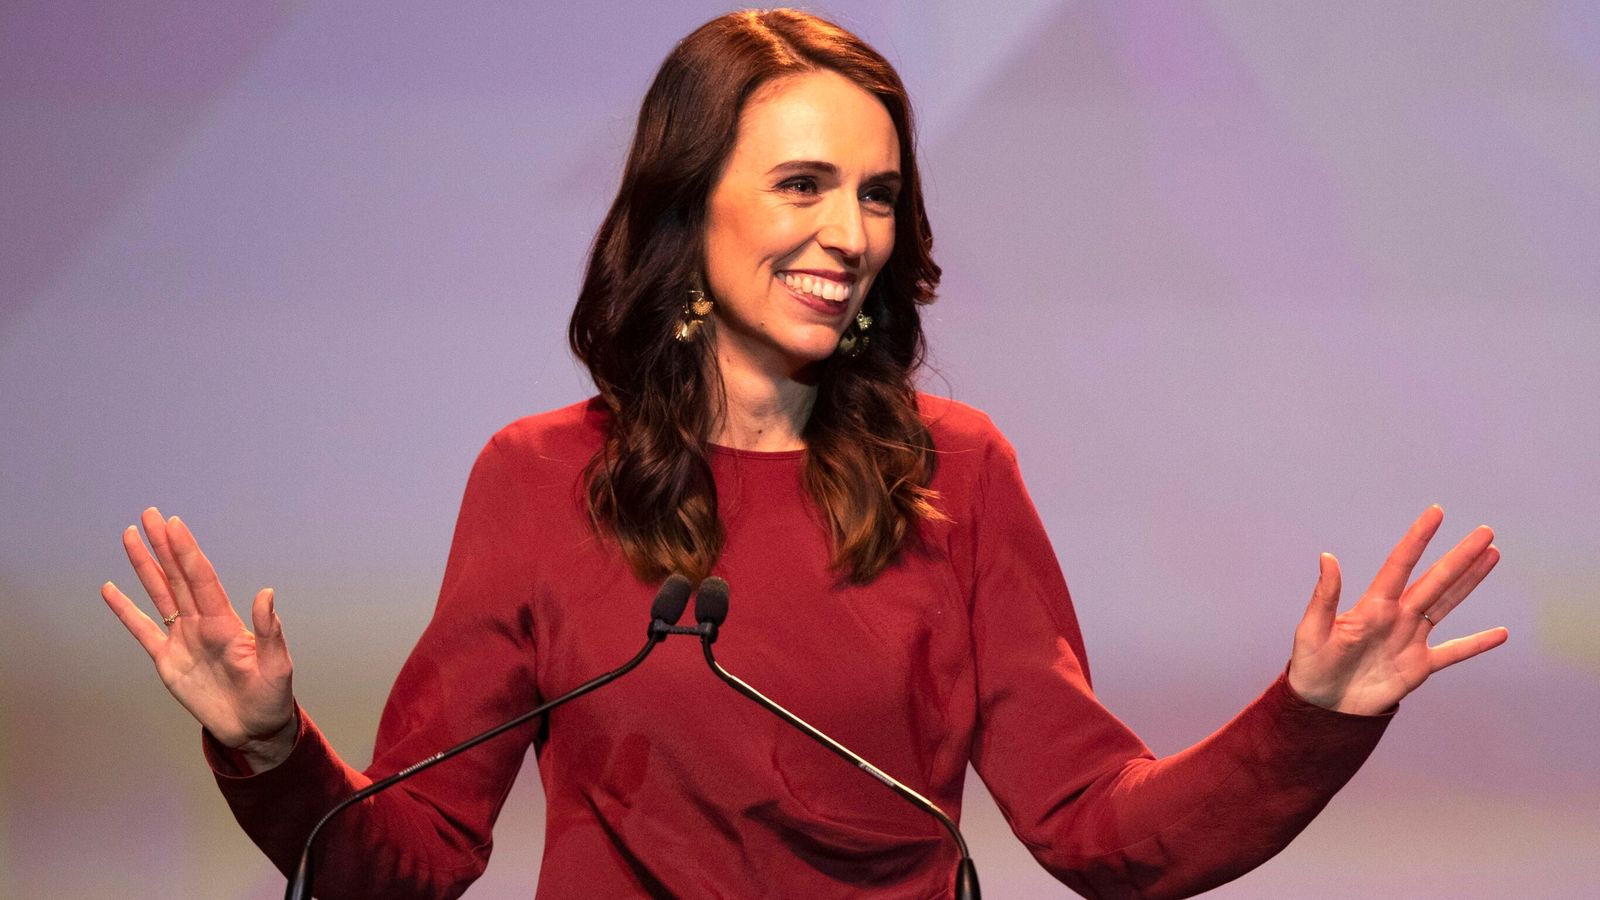 Jacinda Ardern may be dodging humiliation by quitting now - but she's sure of a lasting place as a star | Adam Boulton